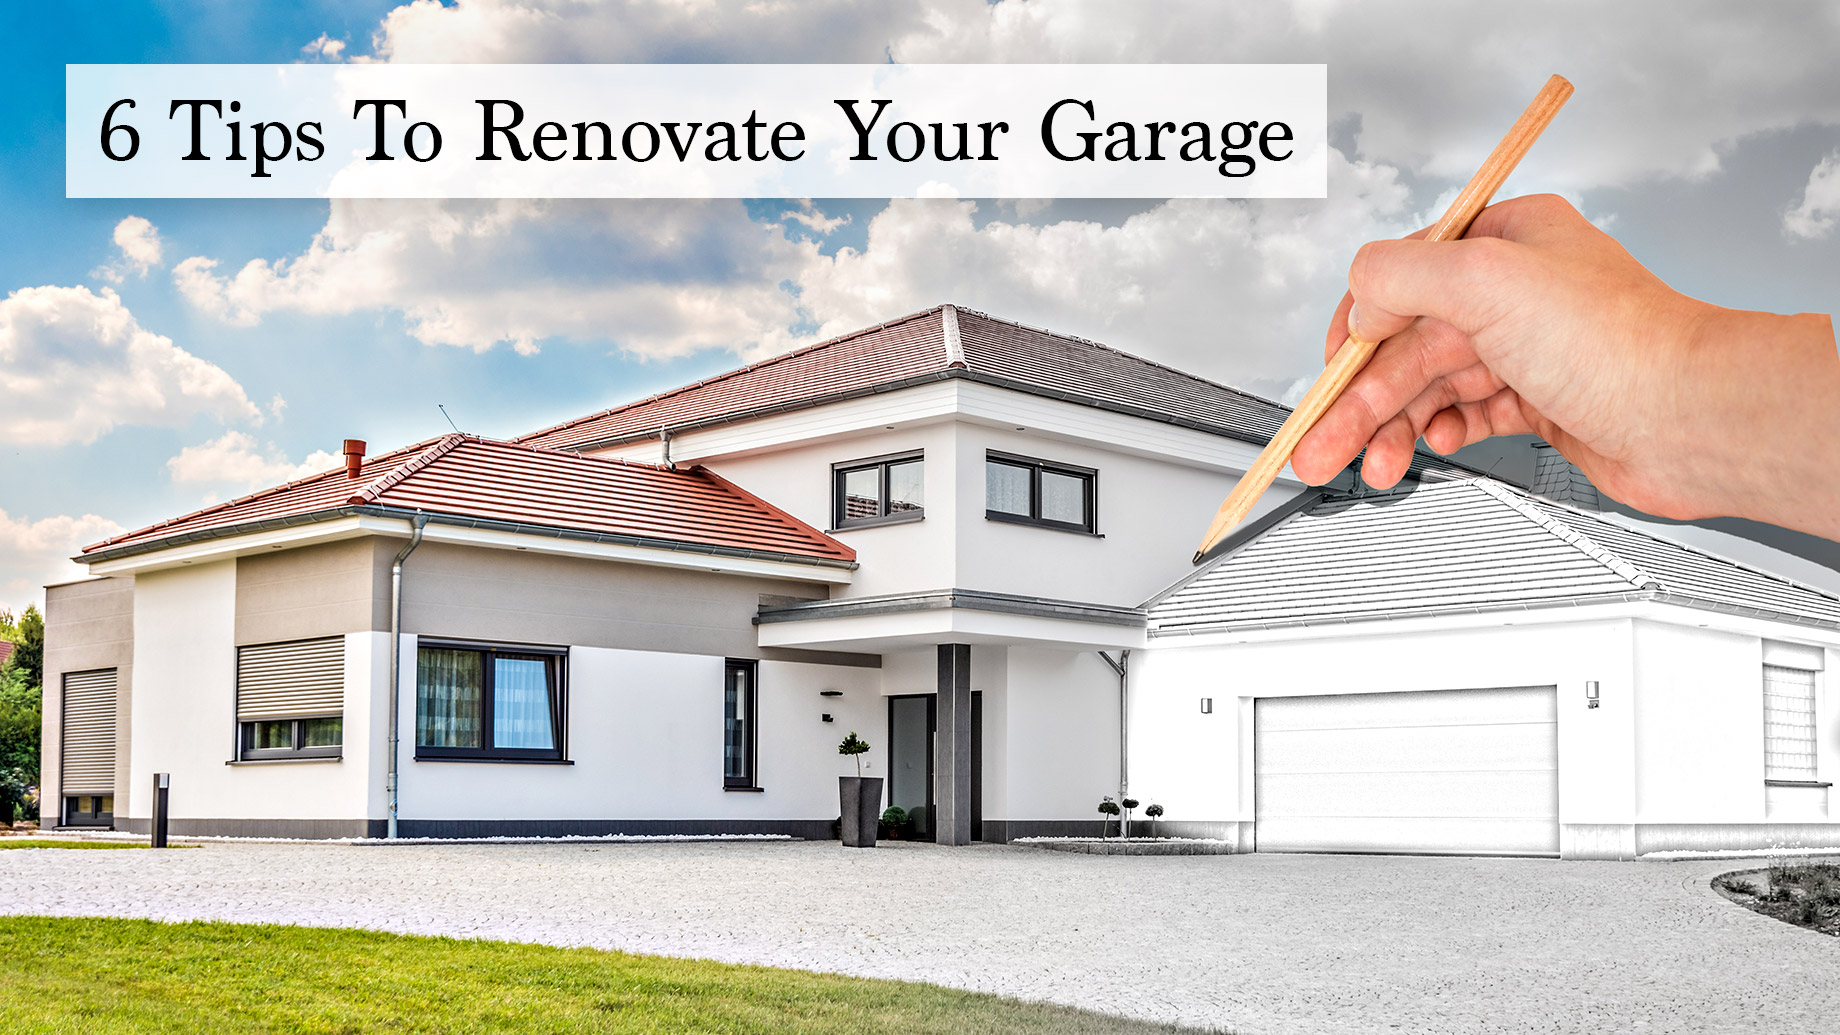 6 Tips To Renovate Your Garage